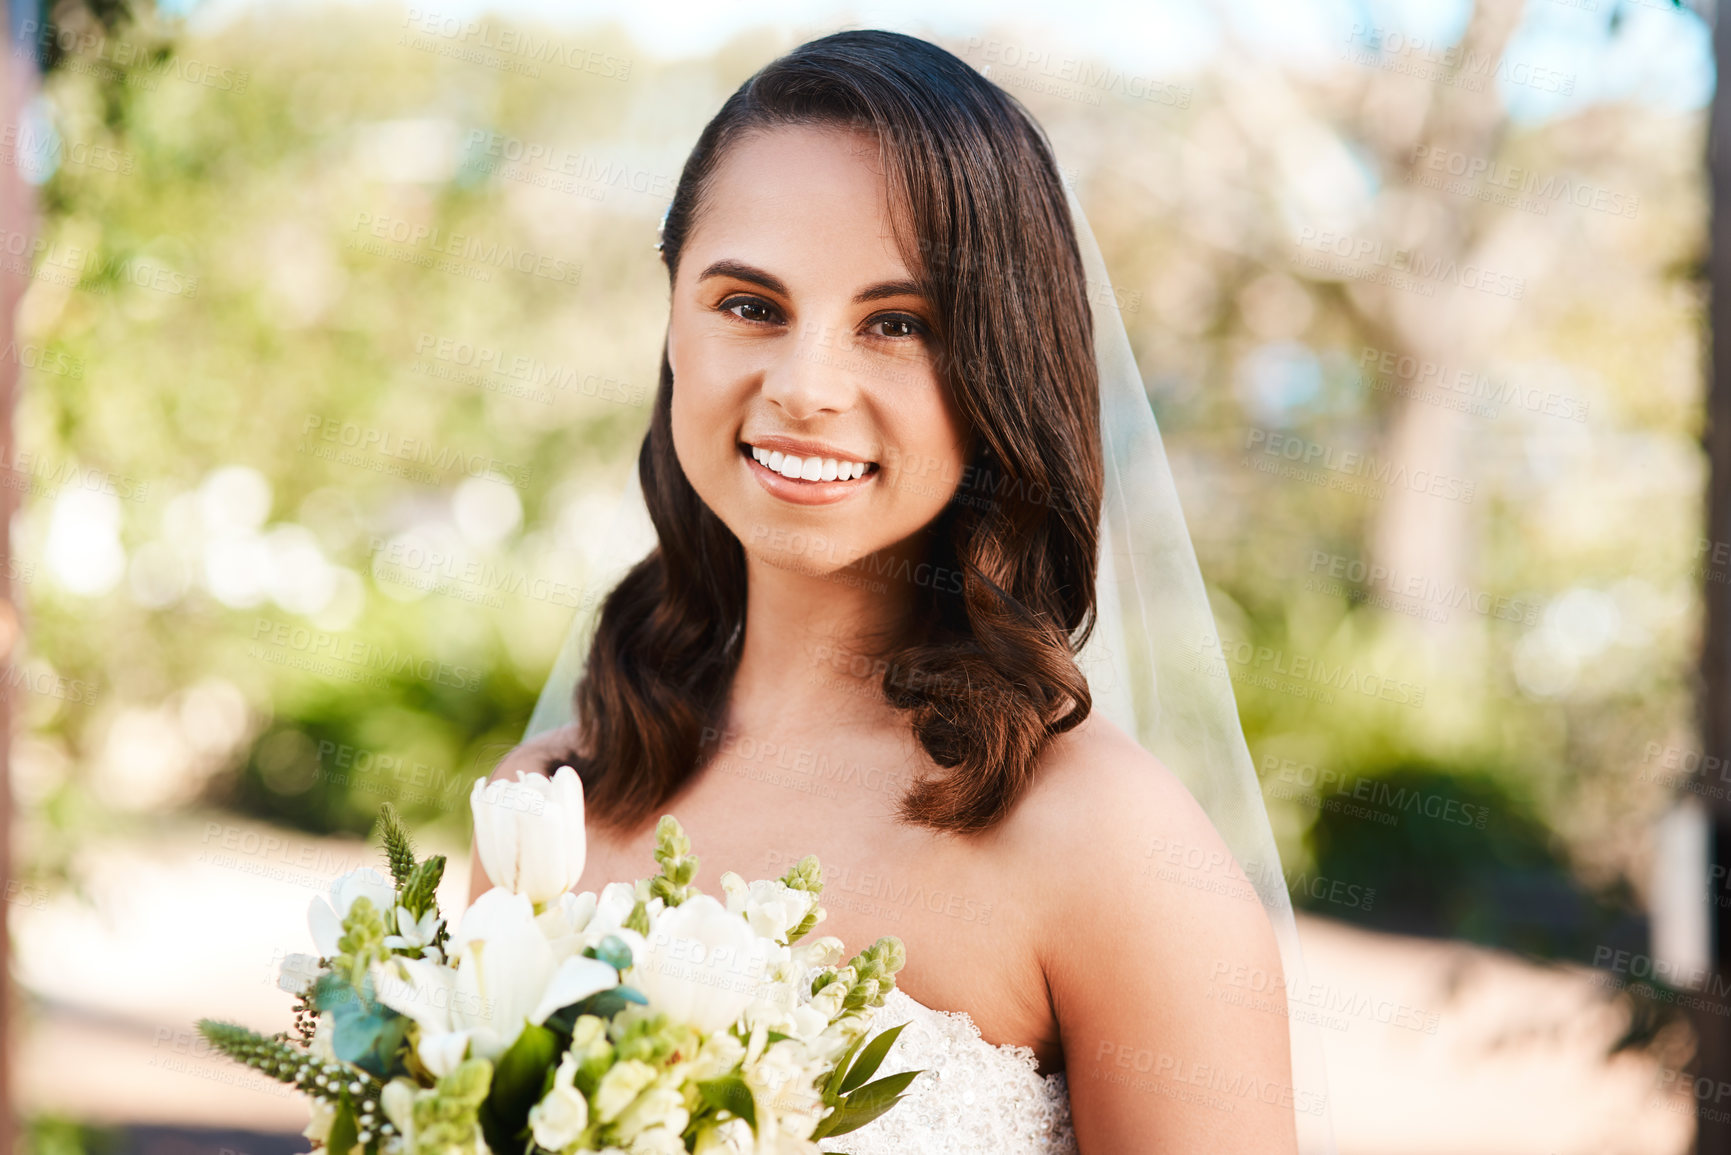 Buy stock photo Cropped portrait of a beautiful young bride smiling while holding a bouquet of flowers on her wedding day